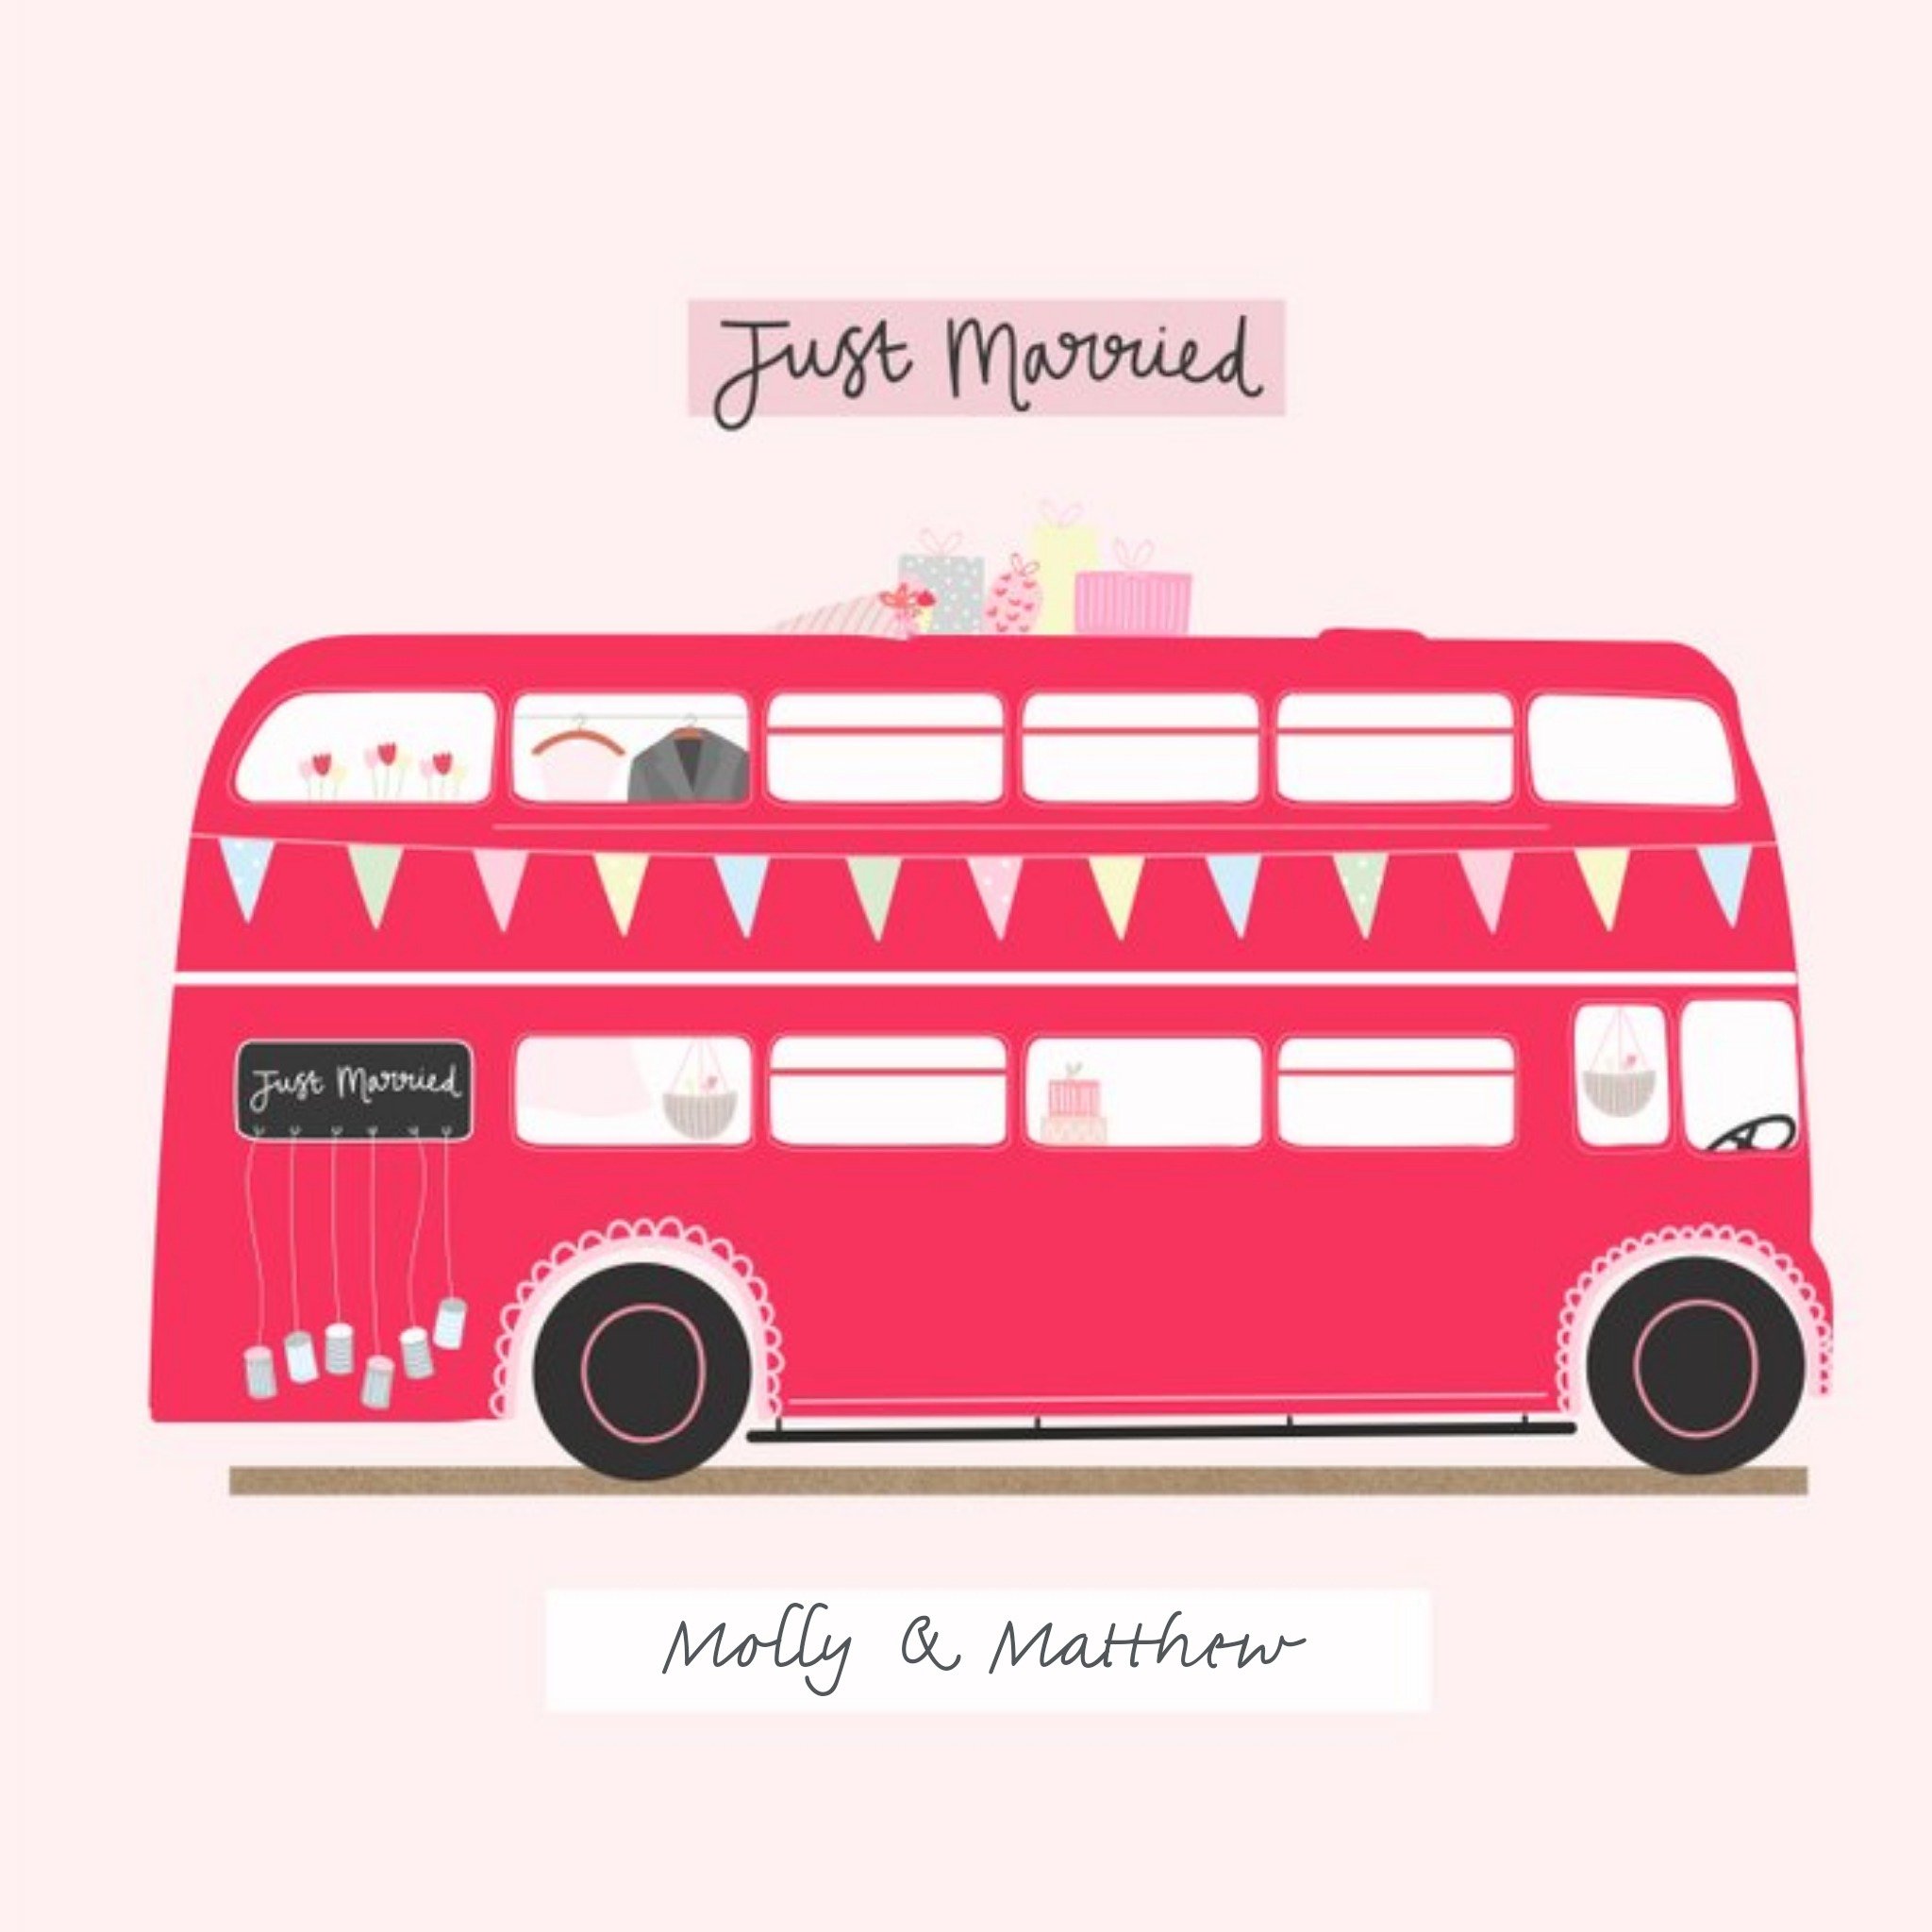 Moonpig Birthday Card - Easy Send - Quick Card - London Bus - Red Bus, Square